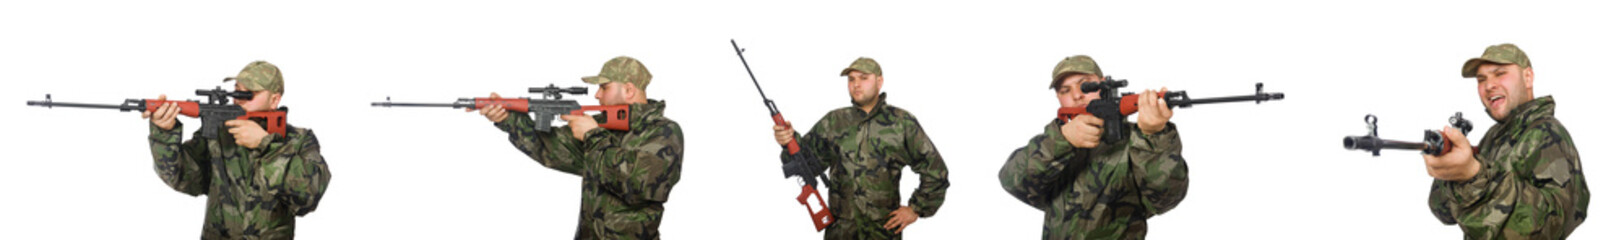 Soldier with sniper rifle isolated on white